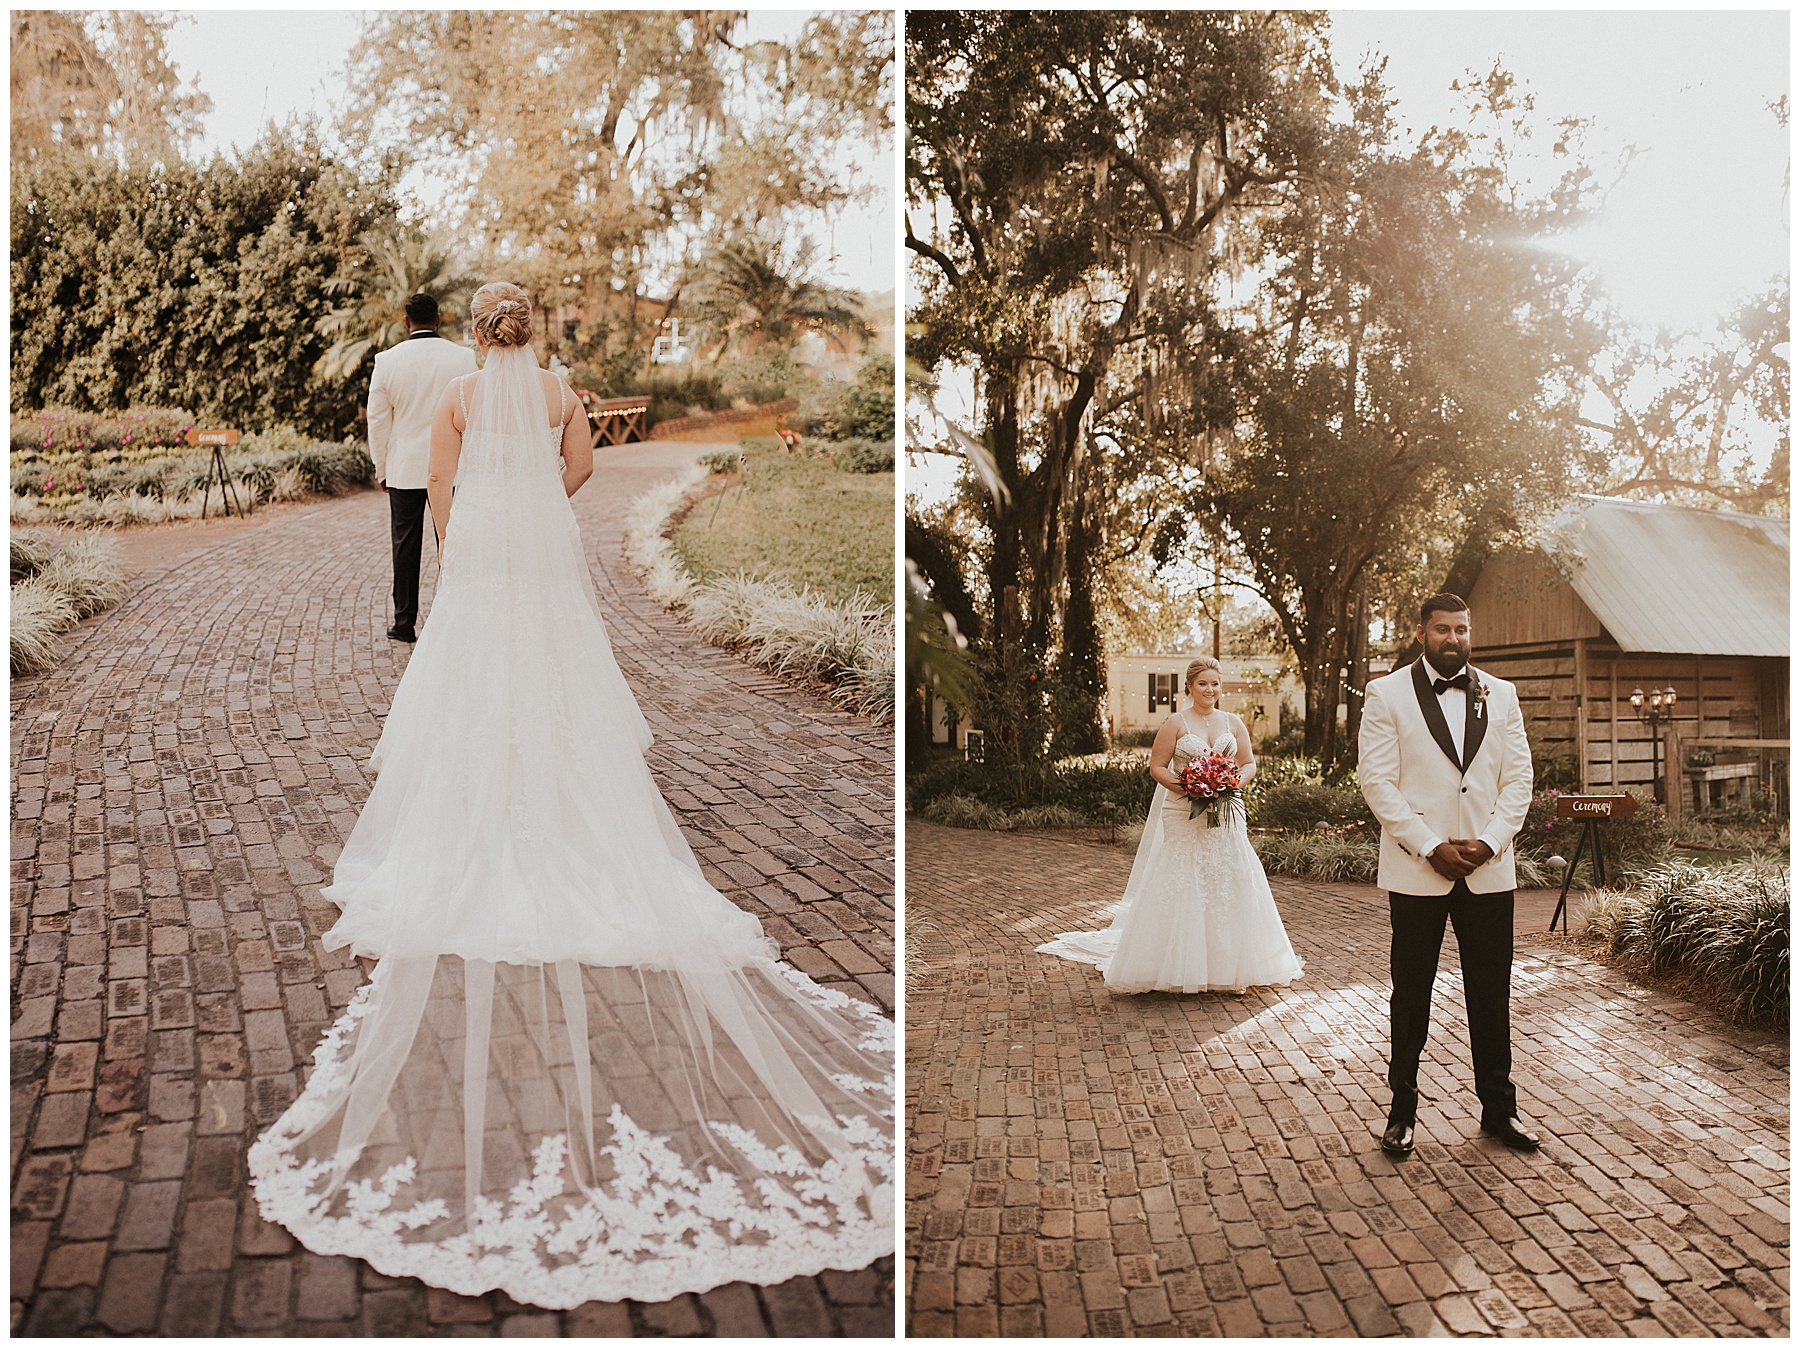 Bride and groom portraits at Cross Creek Ranch, in Dover Florida - Photographed by Juju Photography - Destination wedding photographer